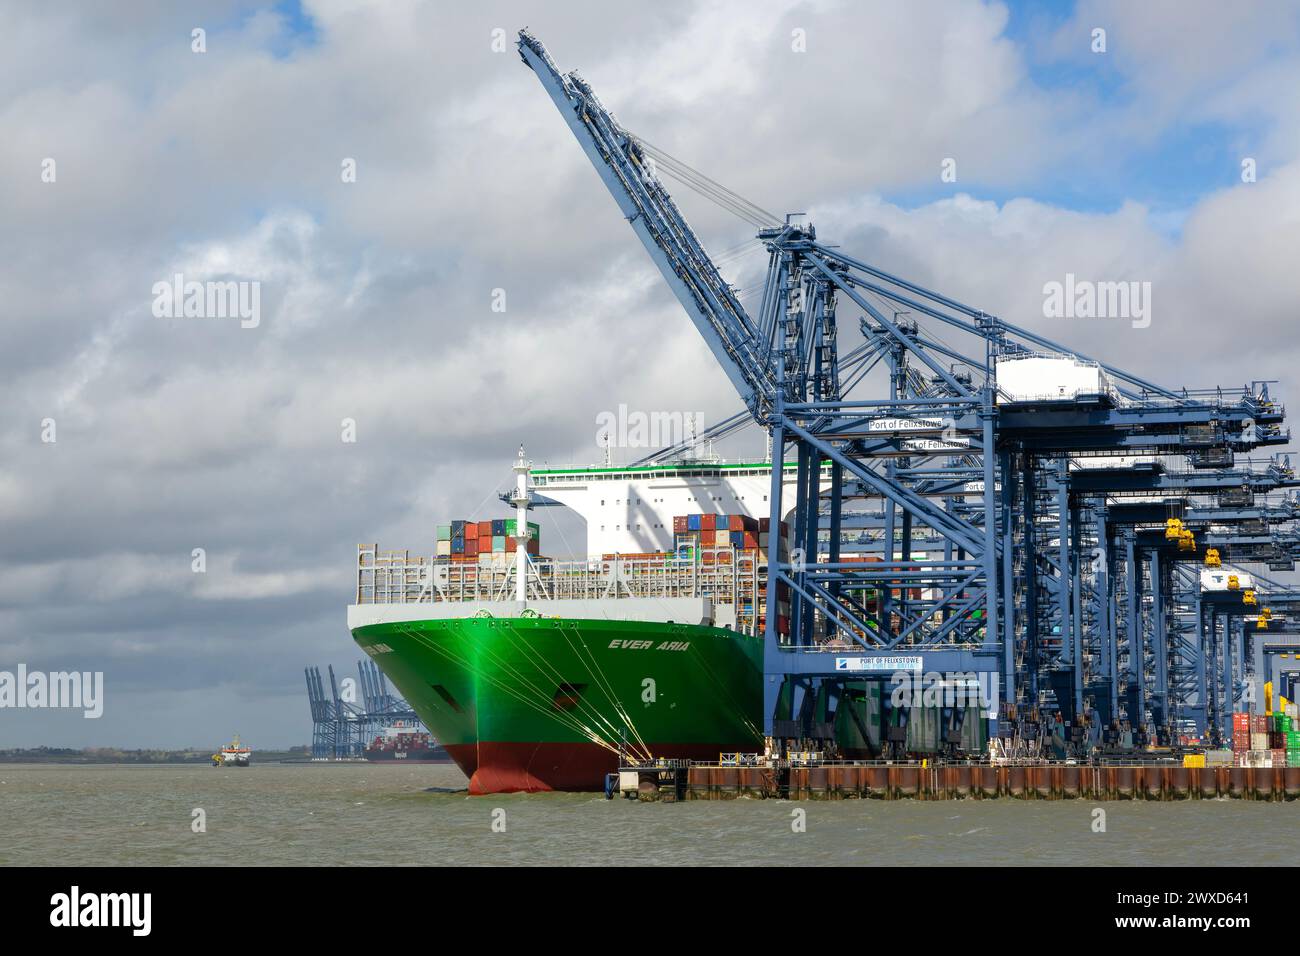 Ever Aria container ship at quayside, Port of Felixstowe, Suffolk, England, UK Stock Photo